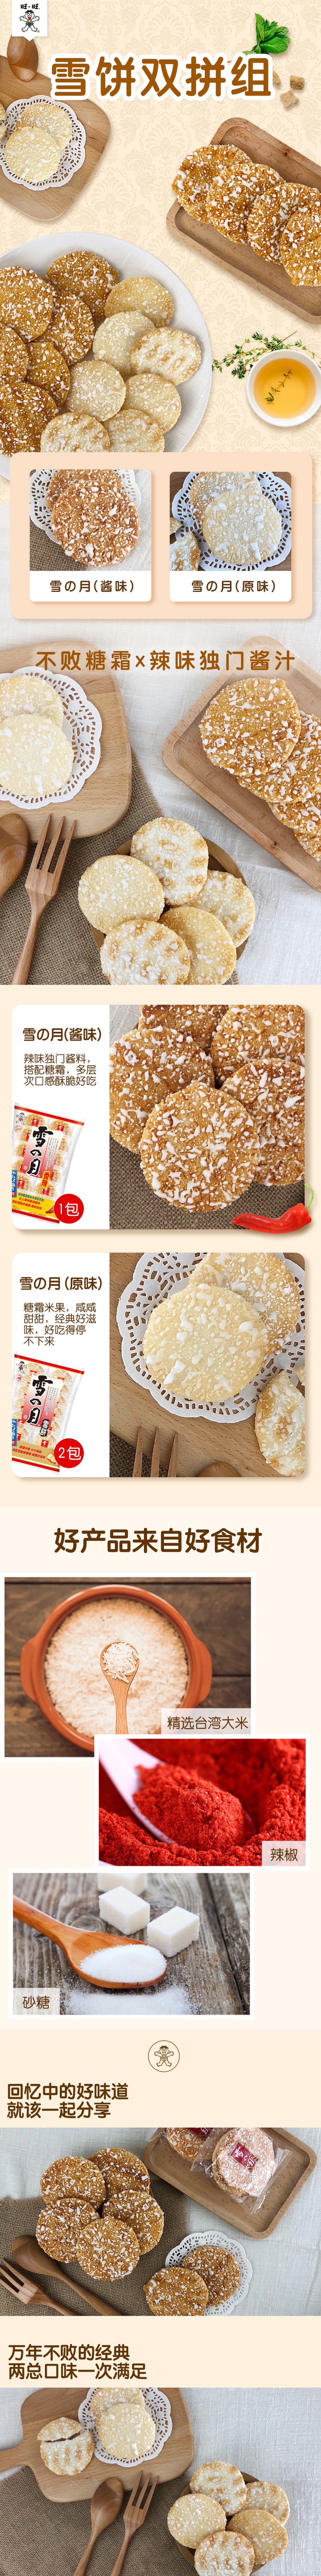 Taiwan Snowy Rice Crackers Crispy Crackers 445gTaiwan Snowy Rice Crackers Crispy Crackers With Original*2/Spicy*1 Flavor 3 Packs 445g